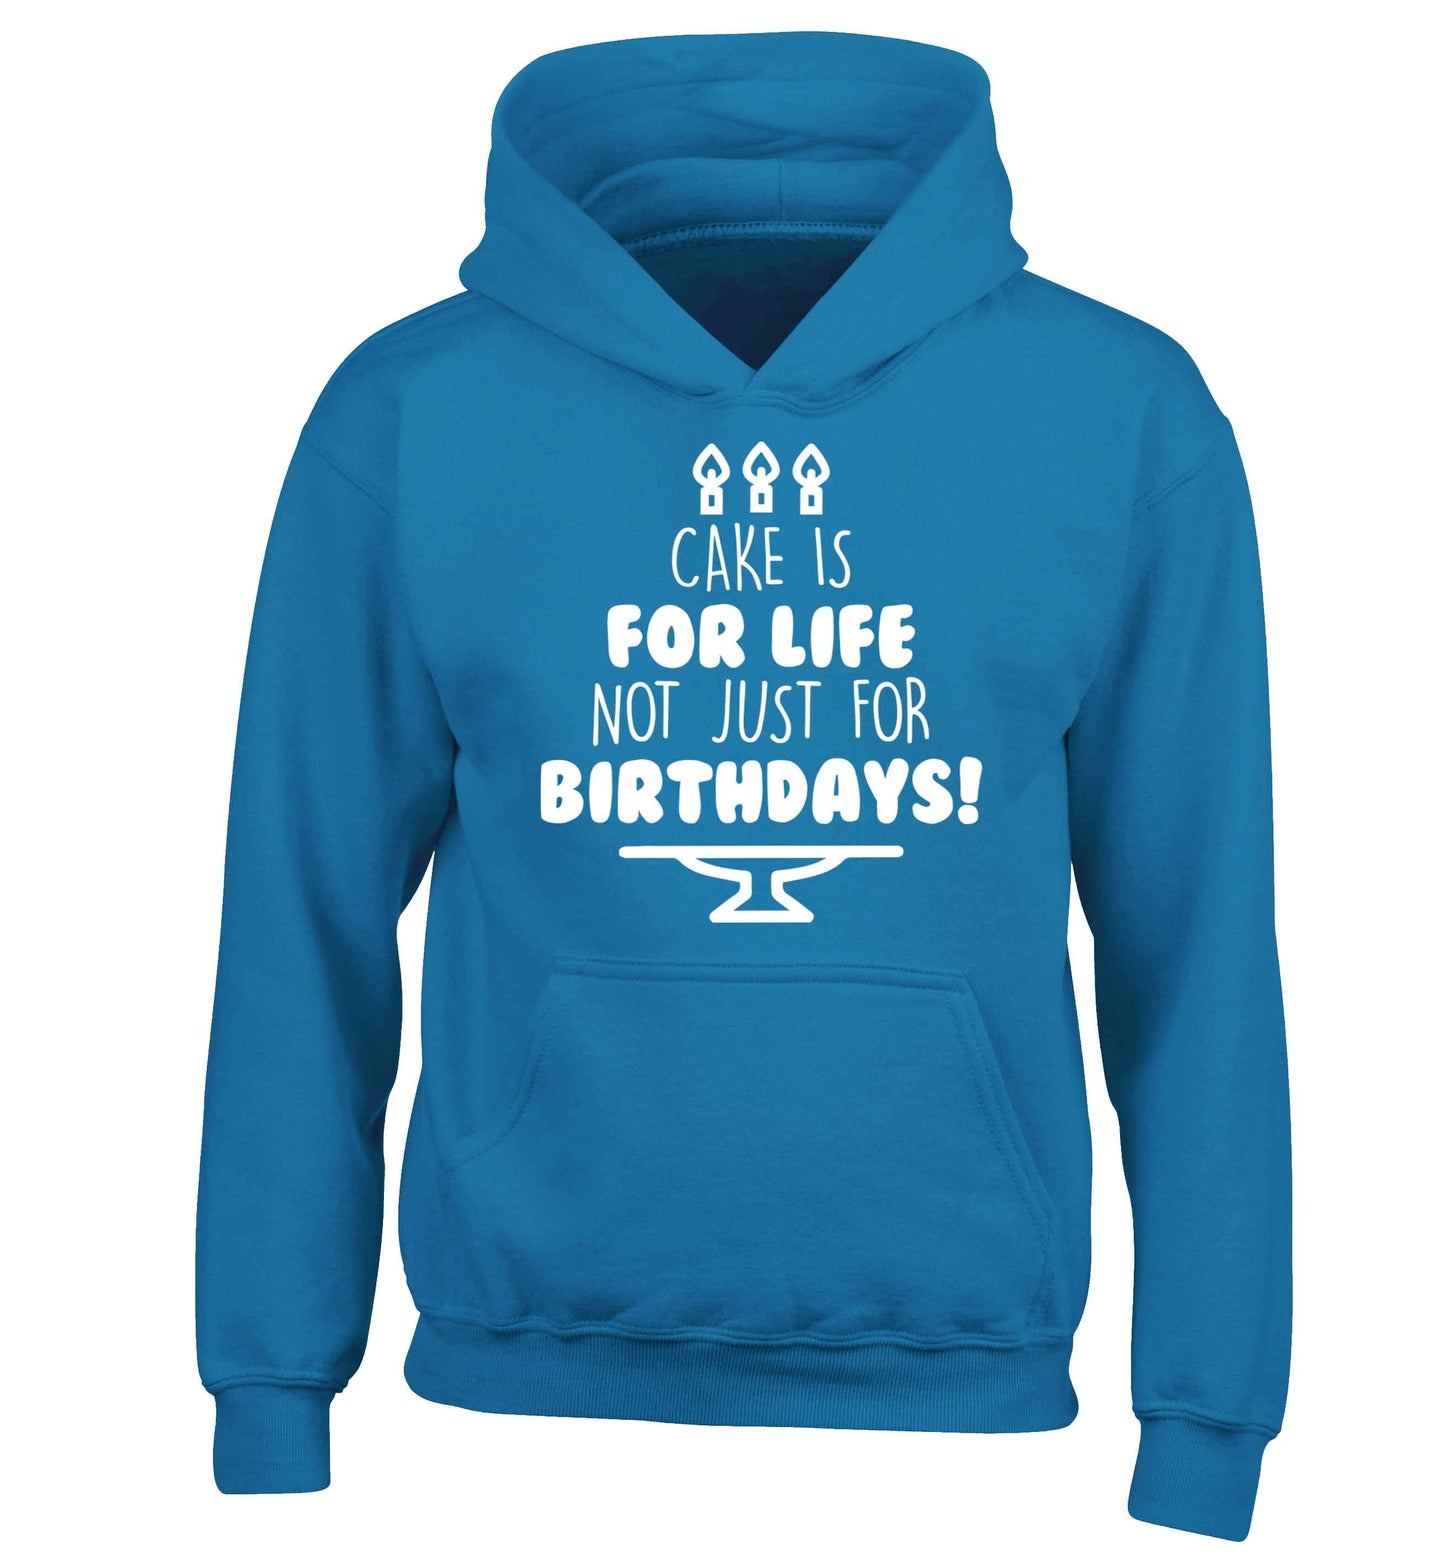 Cake is for life not just for birthdays children's blue hoodie 12-13 Years